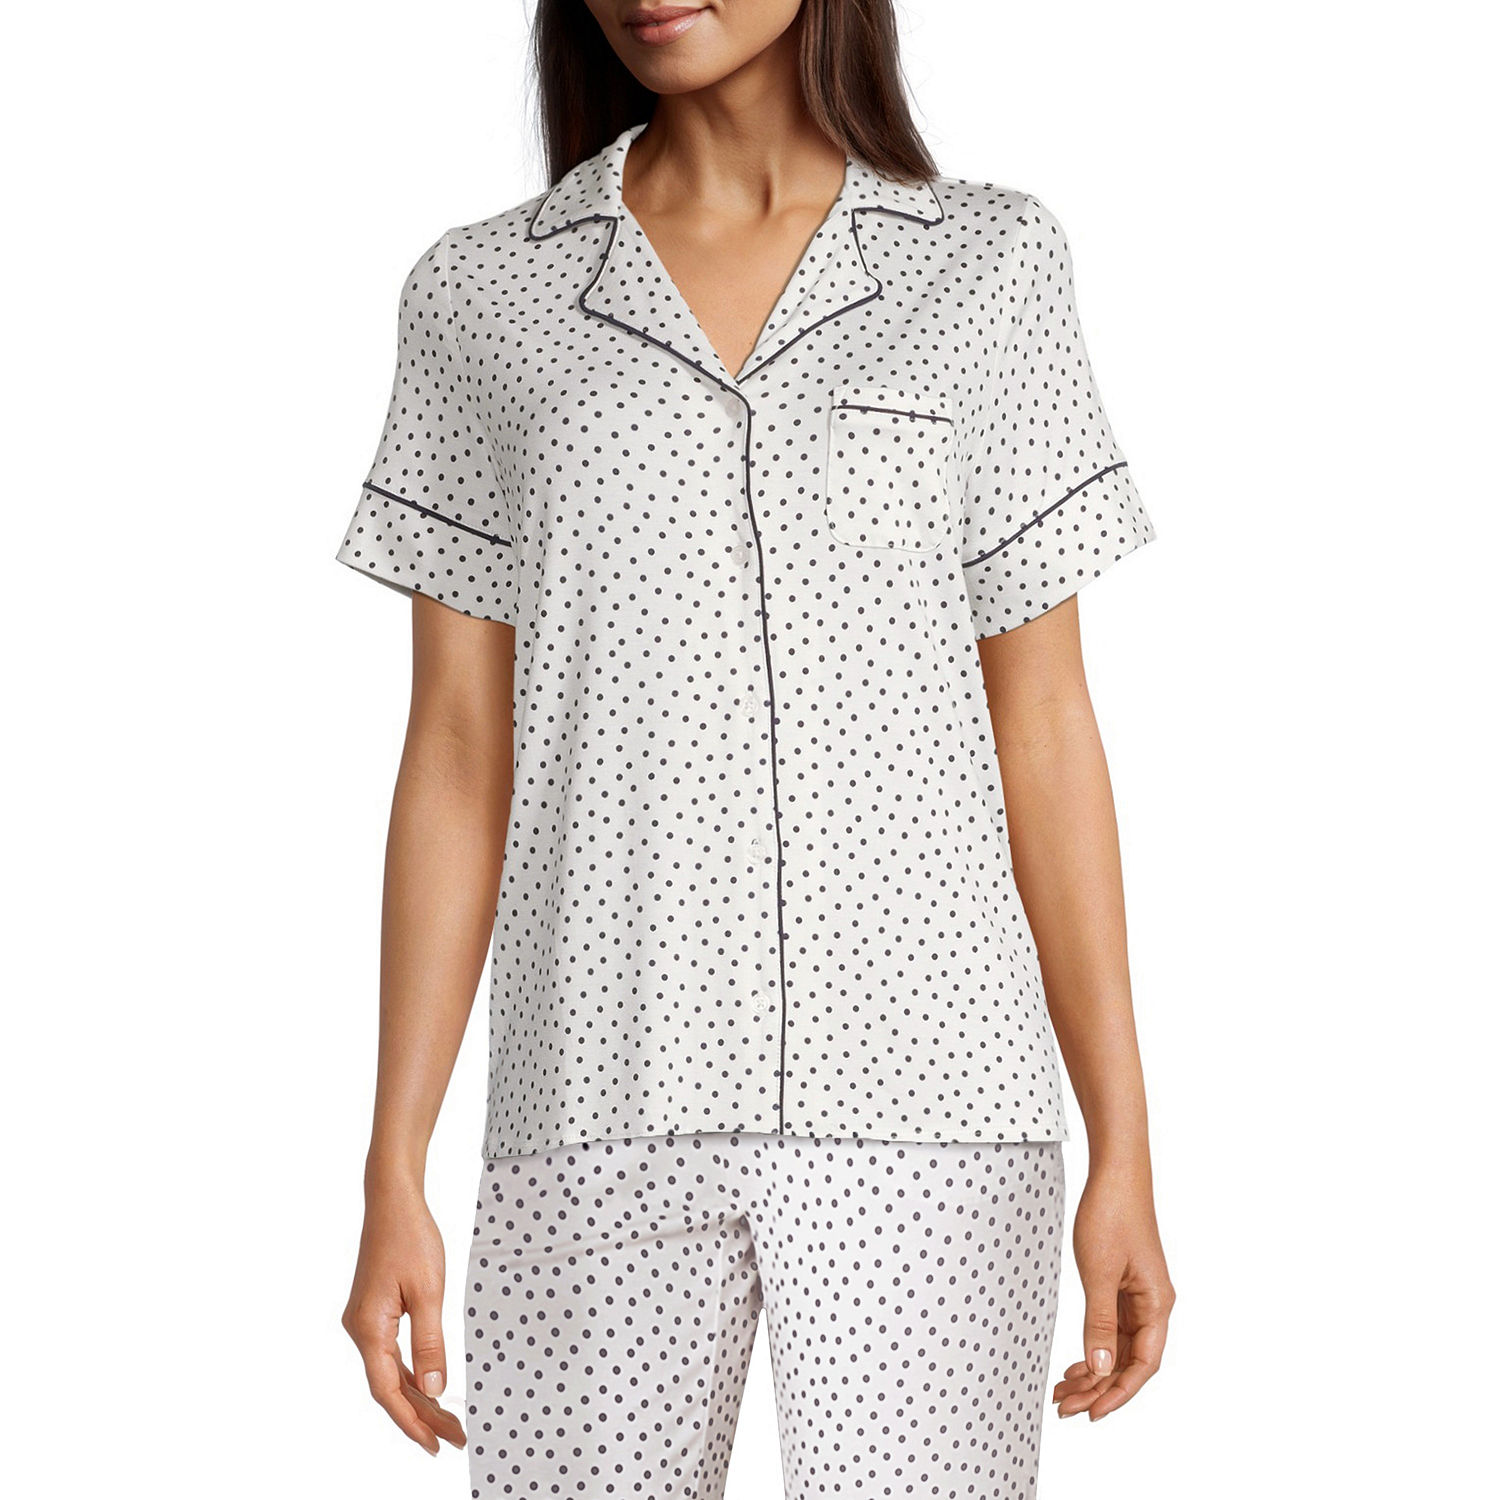 Liz Claiborne Cool and Calm Womens Short Sleeve Pajama Top - JCPenney